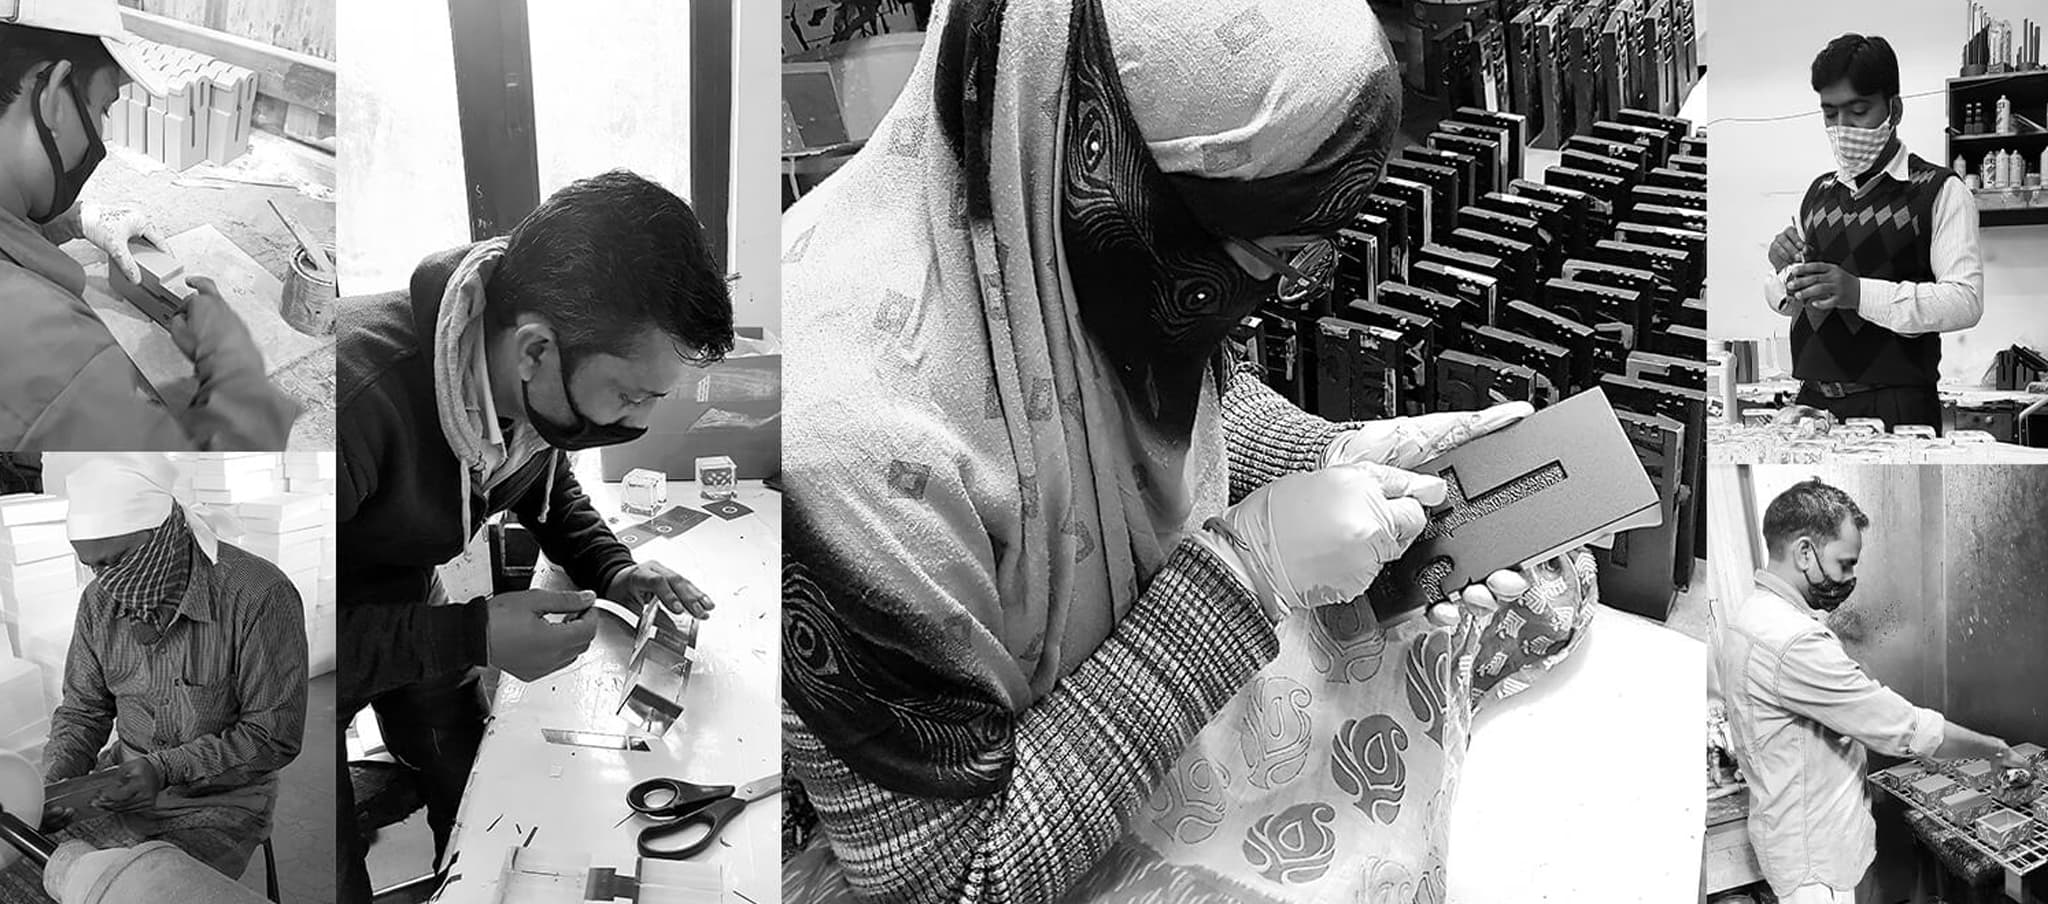 A collage of photos of people working in a factory.